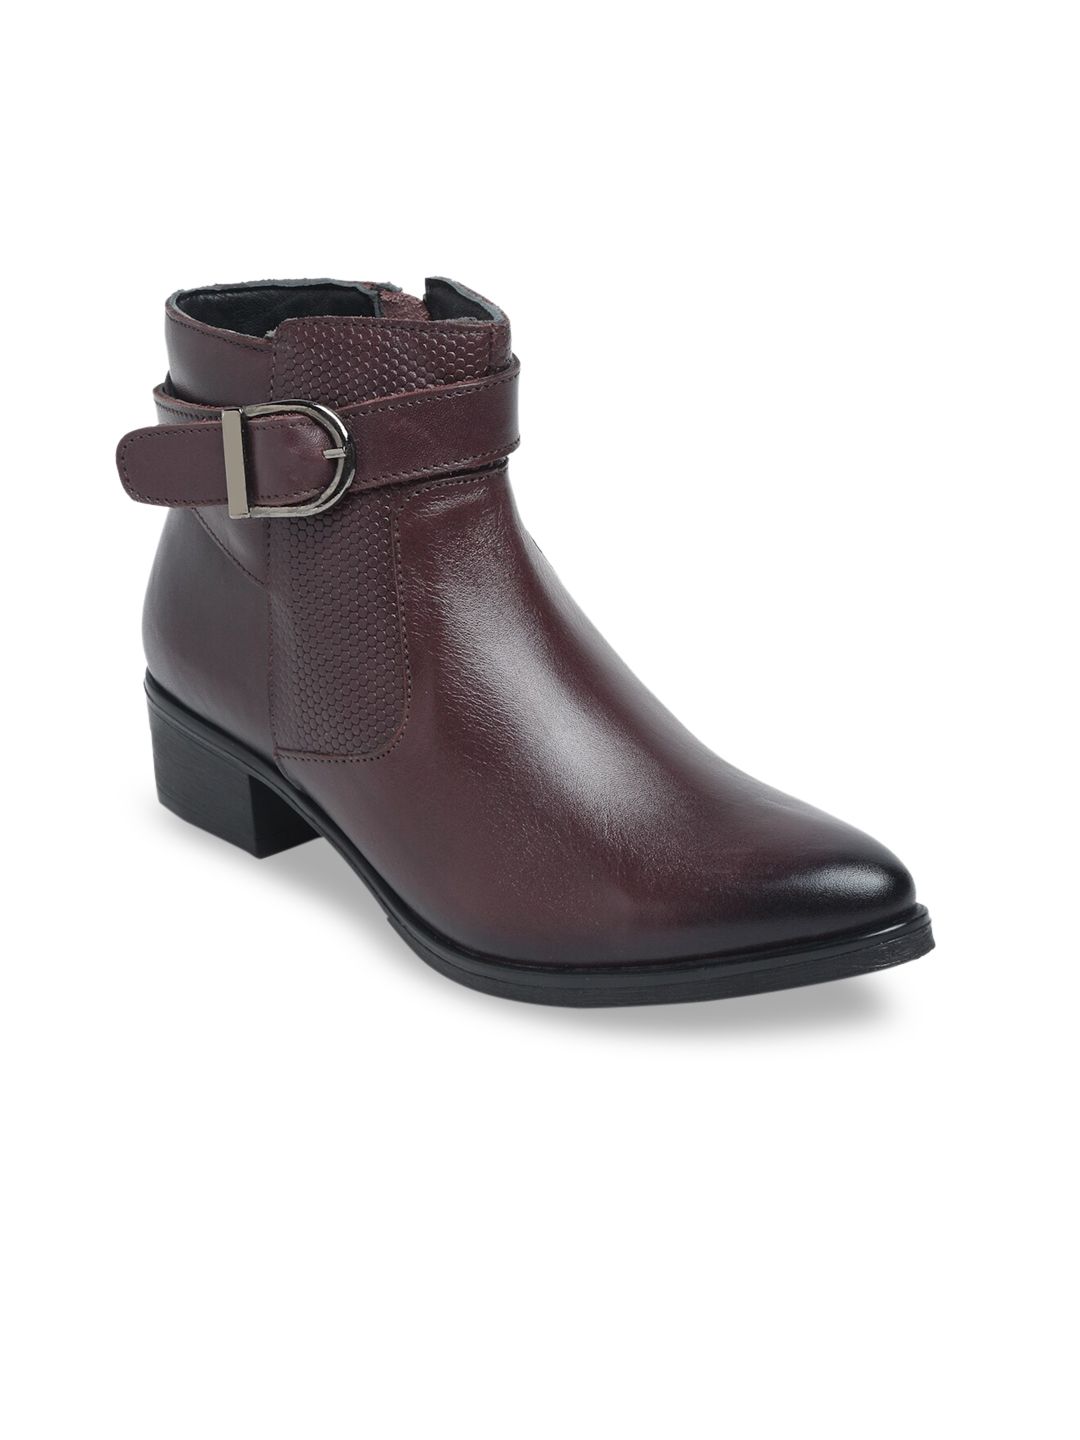 Teakwood Leathers Women Burgundy Leather Flat Boots Price in India